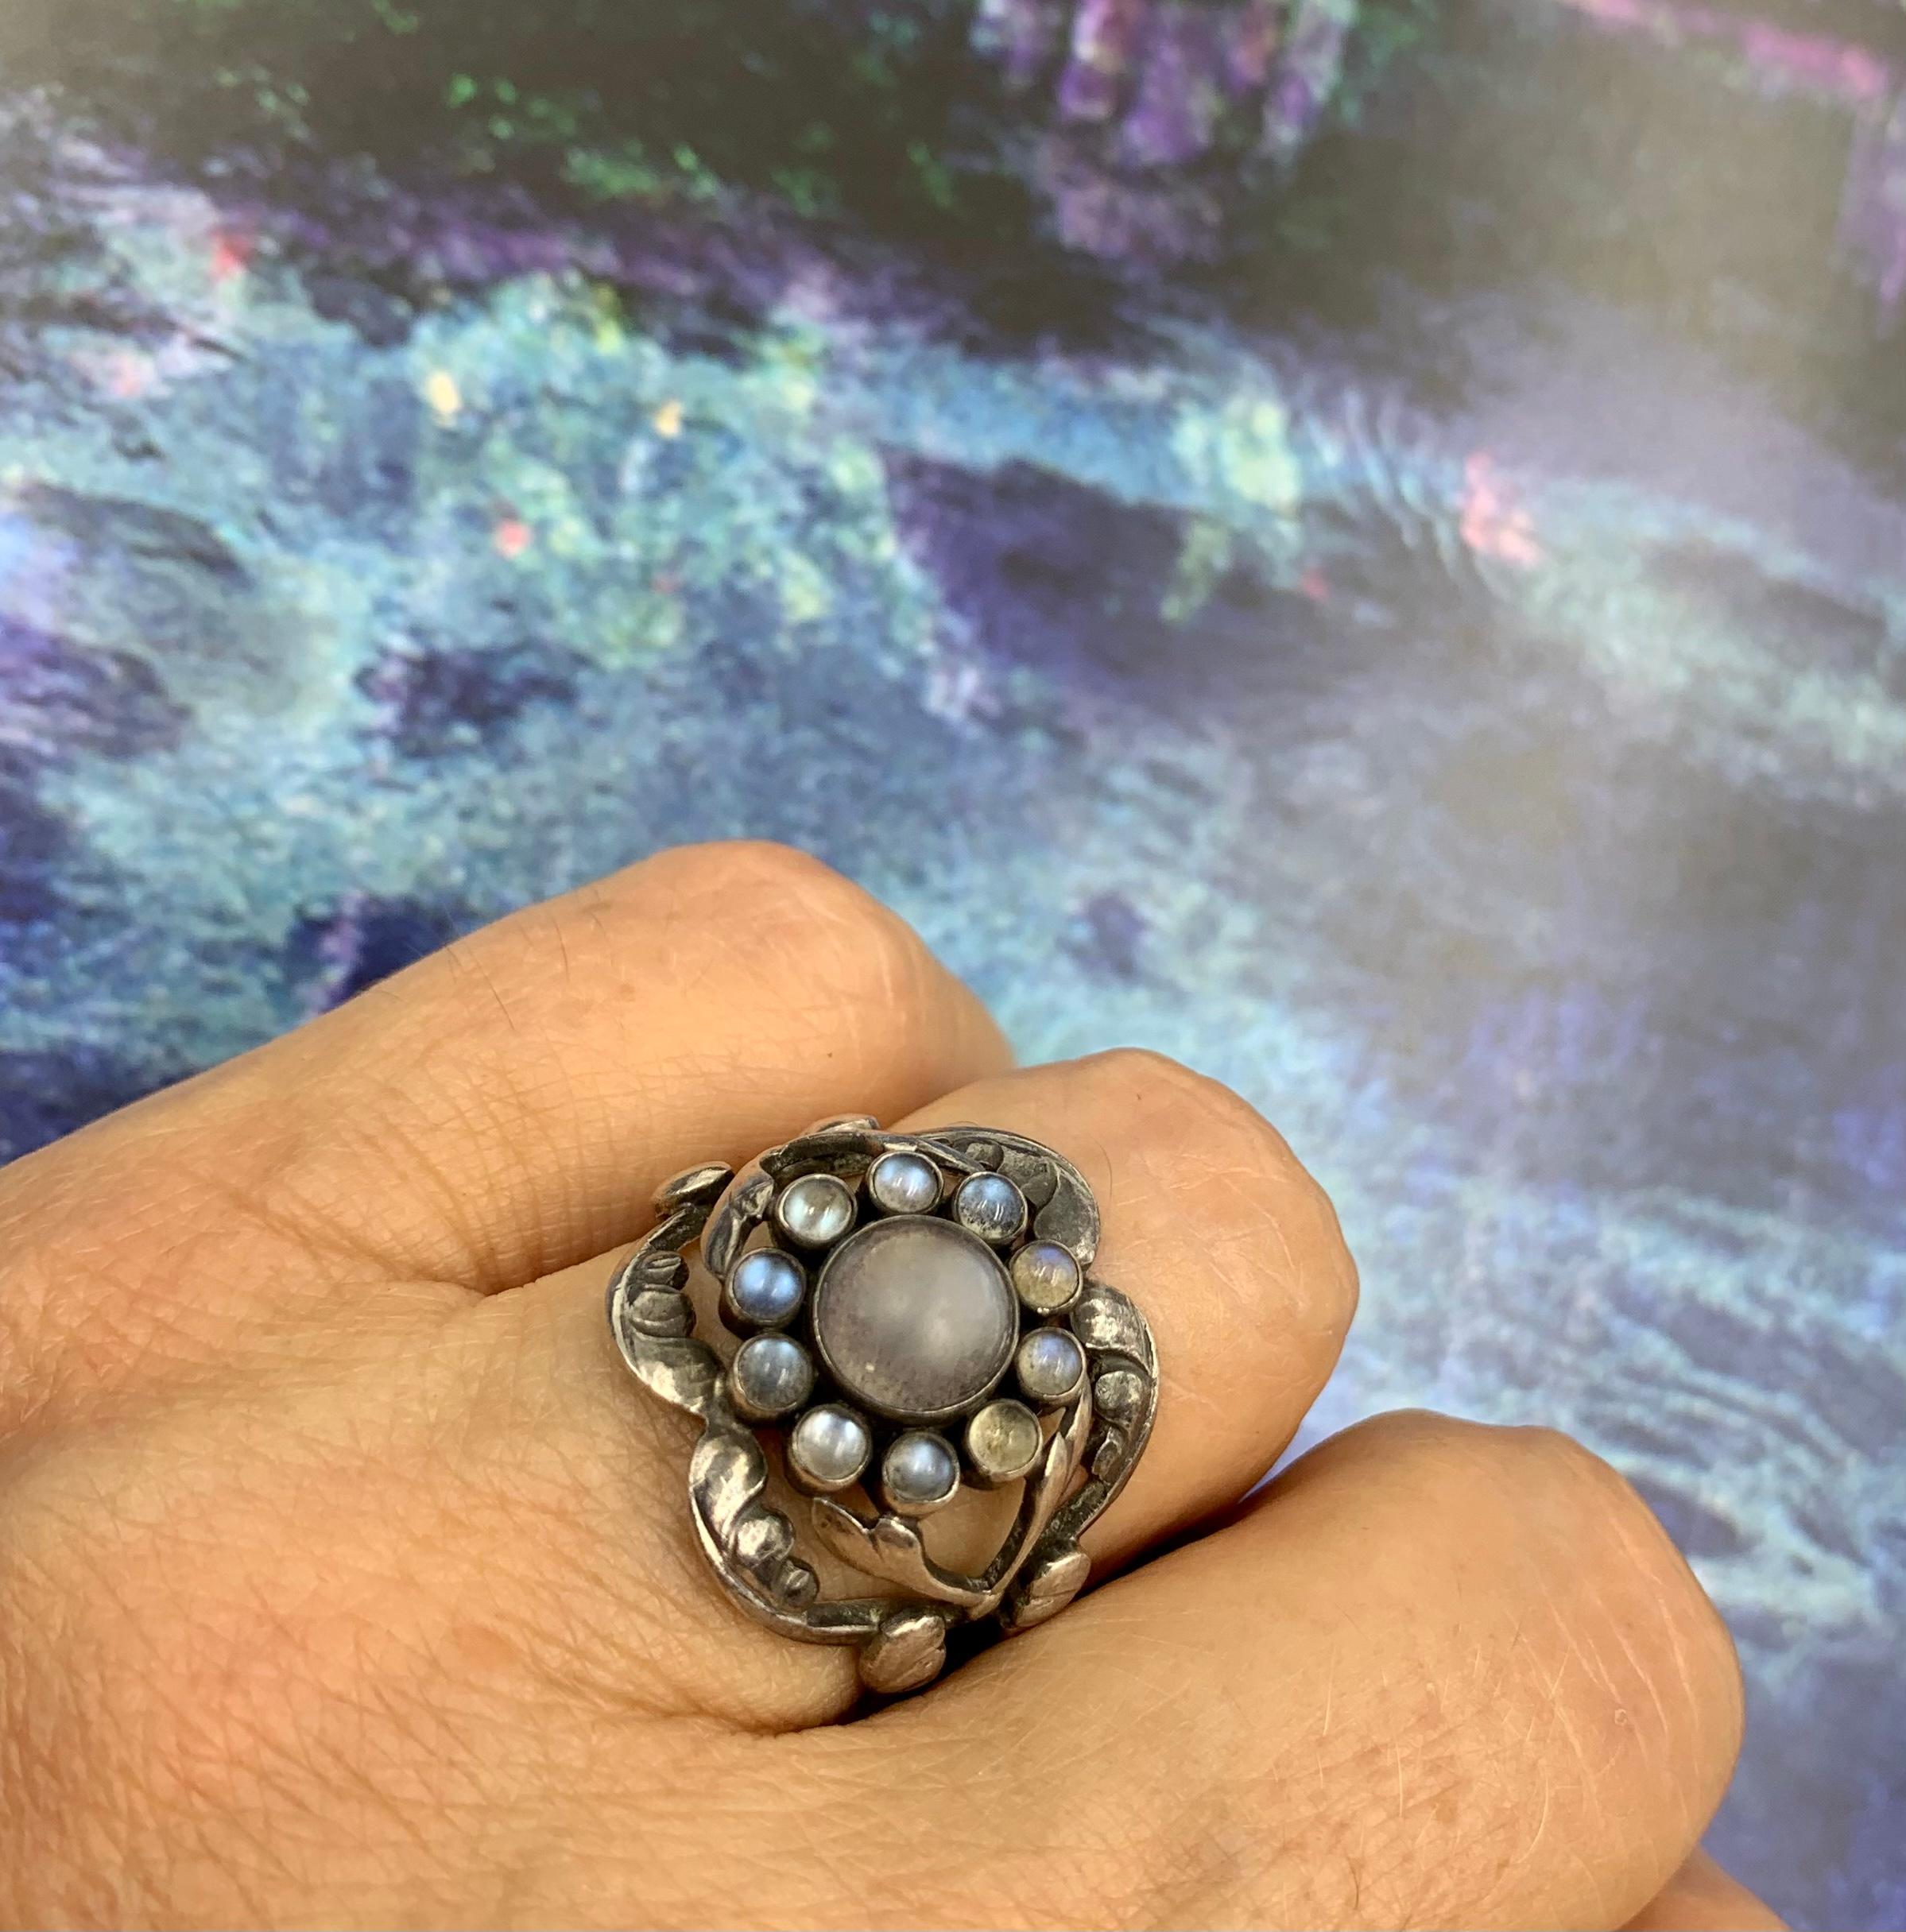 Early Georg Jensen, circa 1930, Moonlight Blossom moonstone and sterling silver ring designed by Georg Jensen himself. The iconic Moonlight Blossom collection is one of the most widely admired and recognizable of Georg Jensen designs. Romantic and